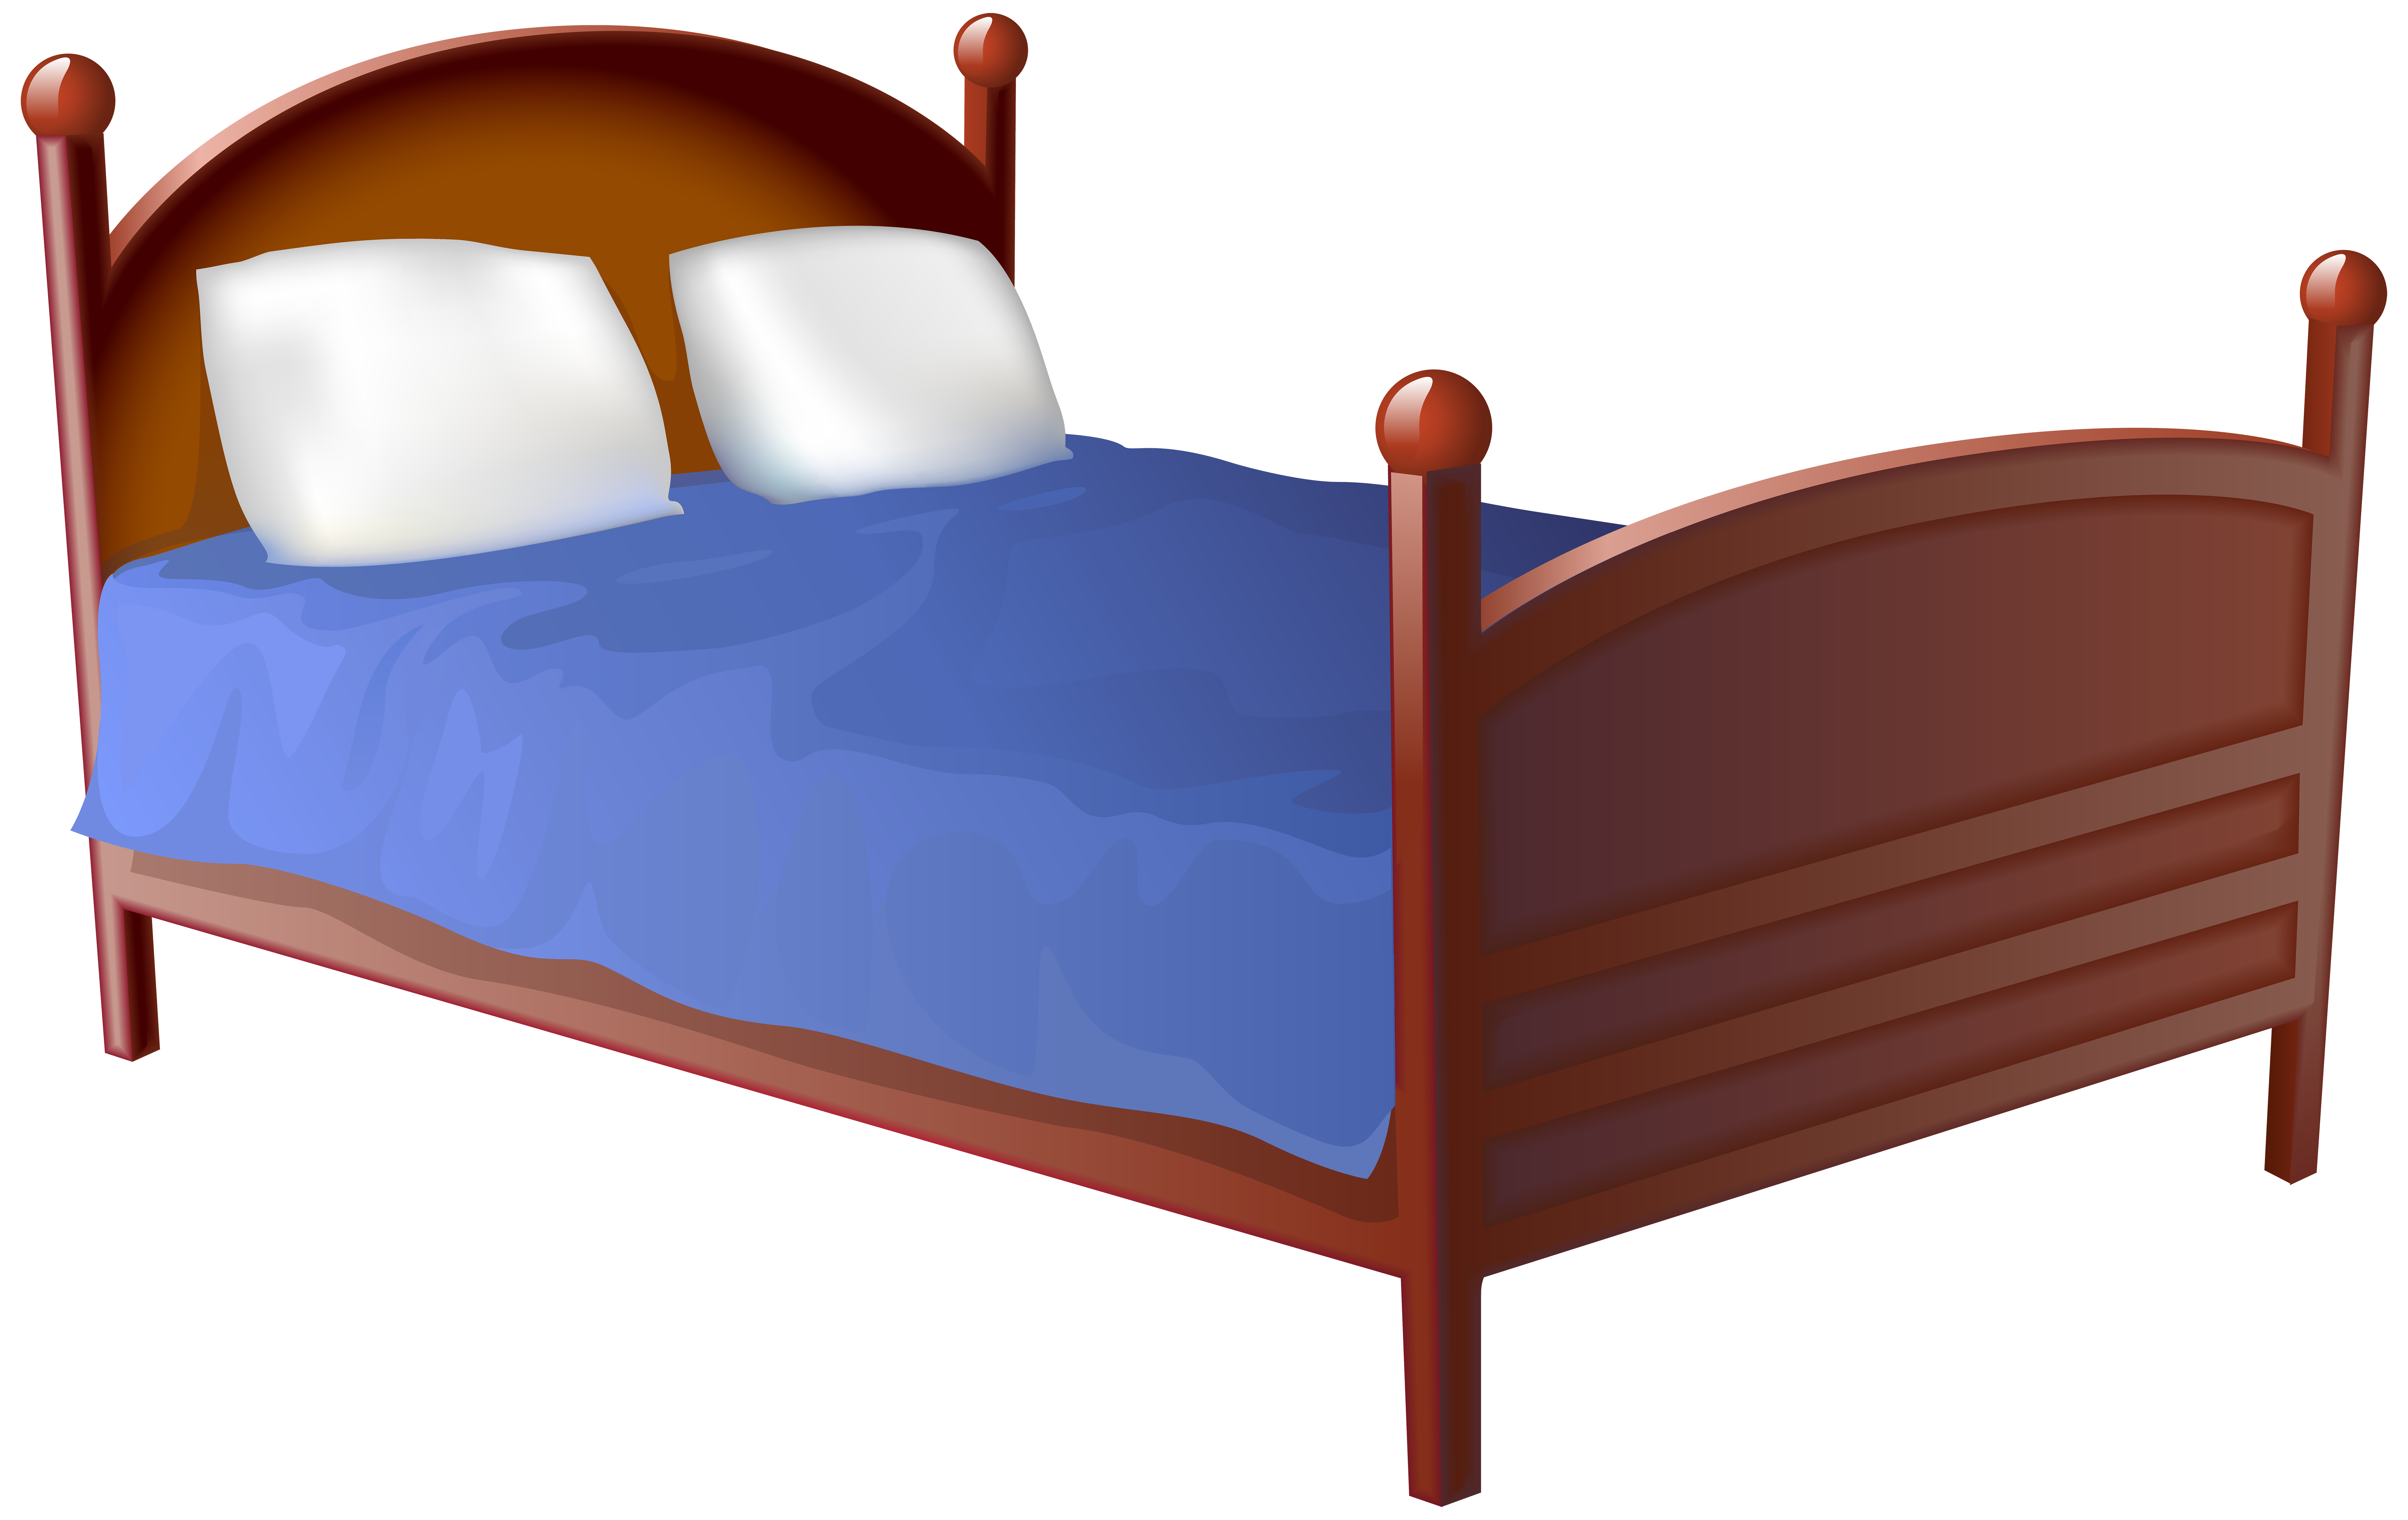 Free Bed Clipart Transparent, Download Free Bed Clipart Transparent png